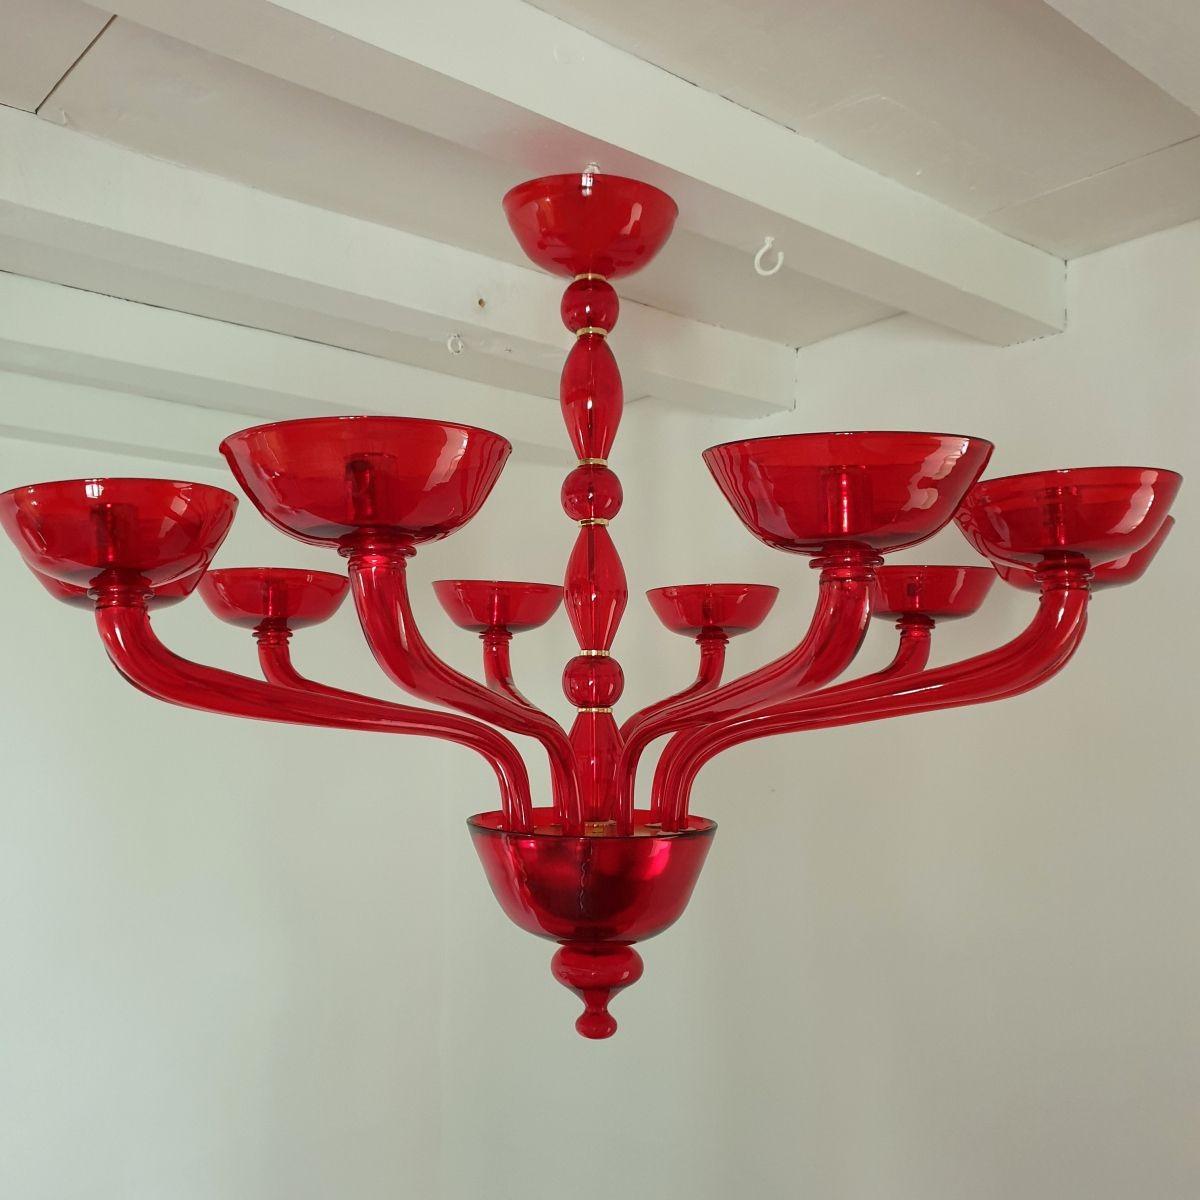 Large red Mid-Century Modern Murano glass chandelier, Venini style, Italy 1980s.
A shiny carmine red Murano glass chandelier, with gold plated mounts.
The neoclassical style chandelier has ten arms and lights and is professionally rewired for the US